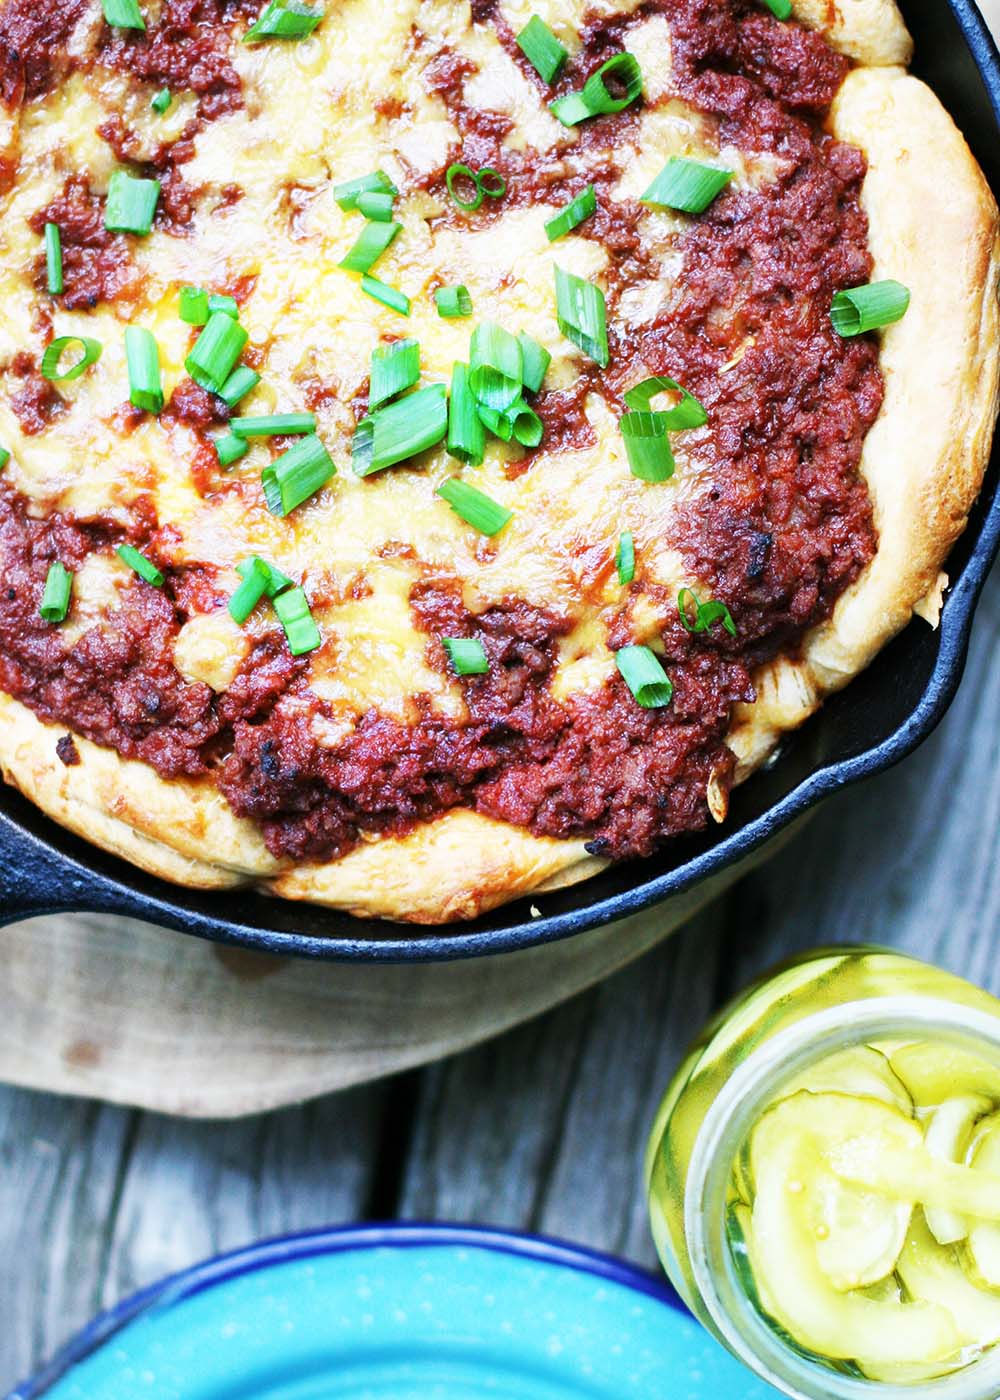 Cheesy sloppy joe pie recipe: Refrigerator biscuits make for the easiest crust!